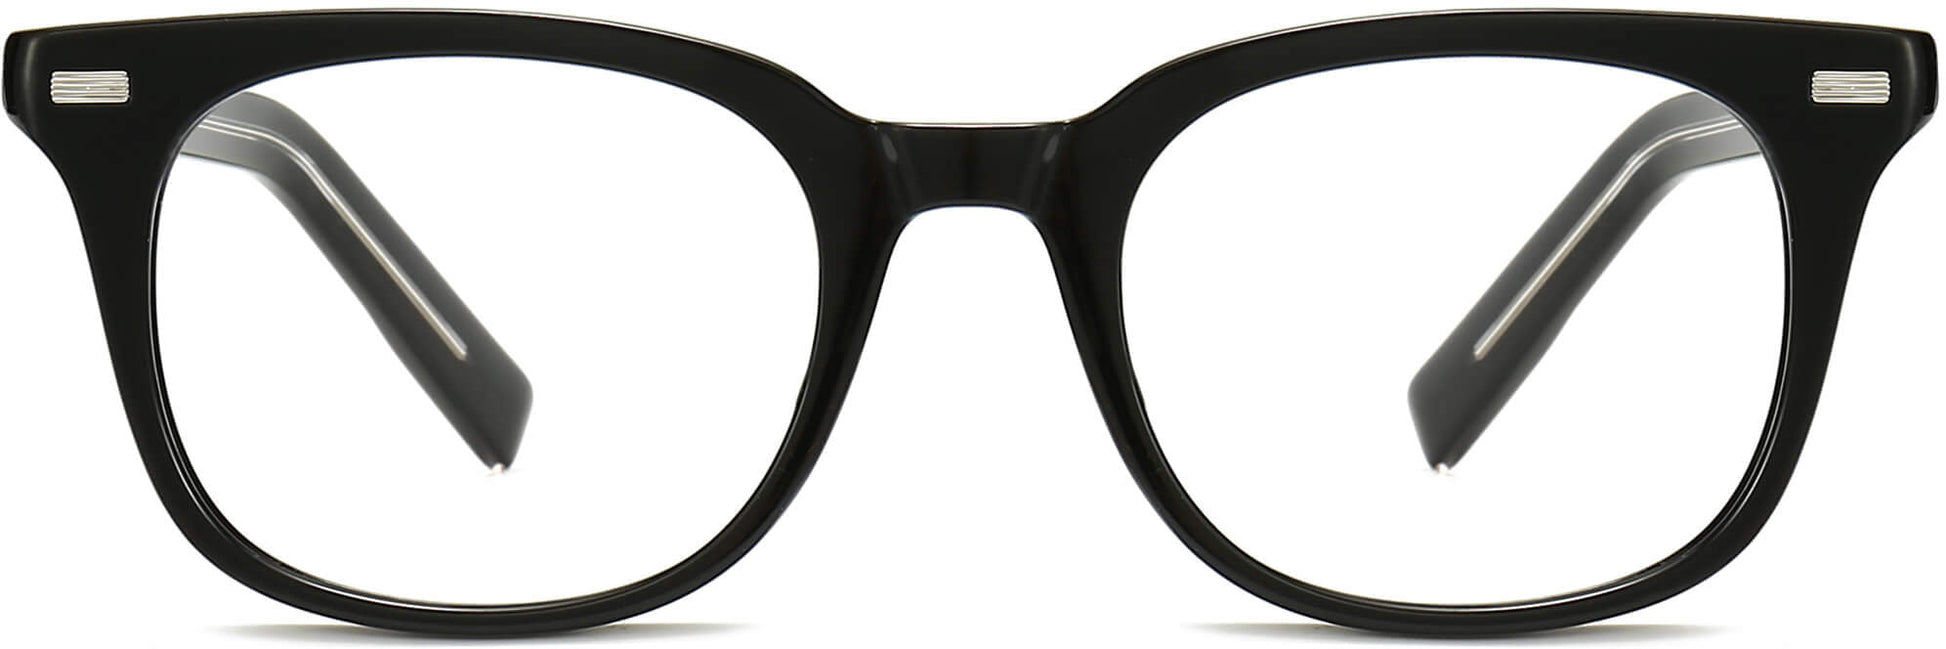 Shiloh Round Black Eyeglasses from ANRRI, front view